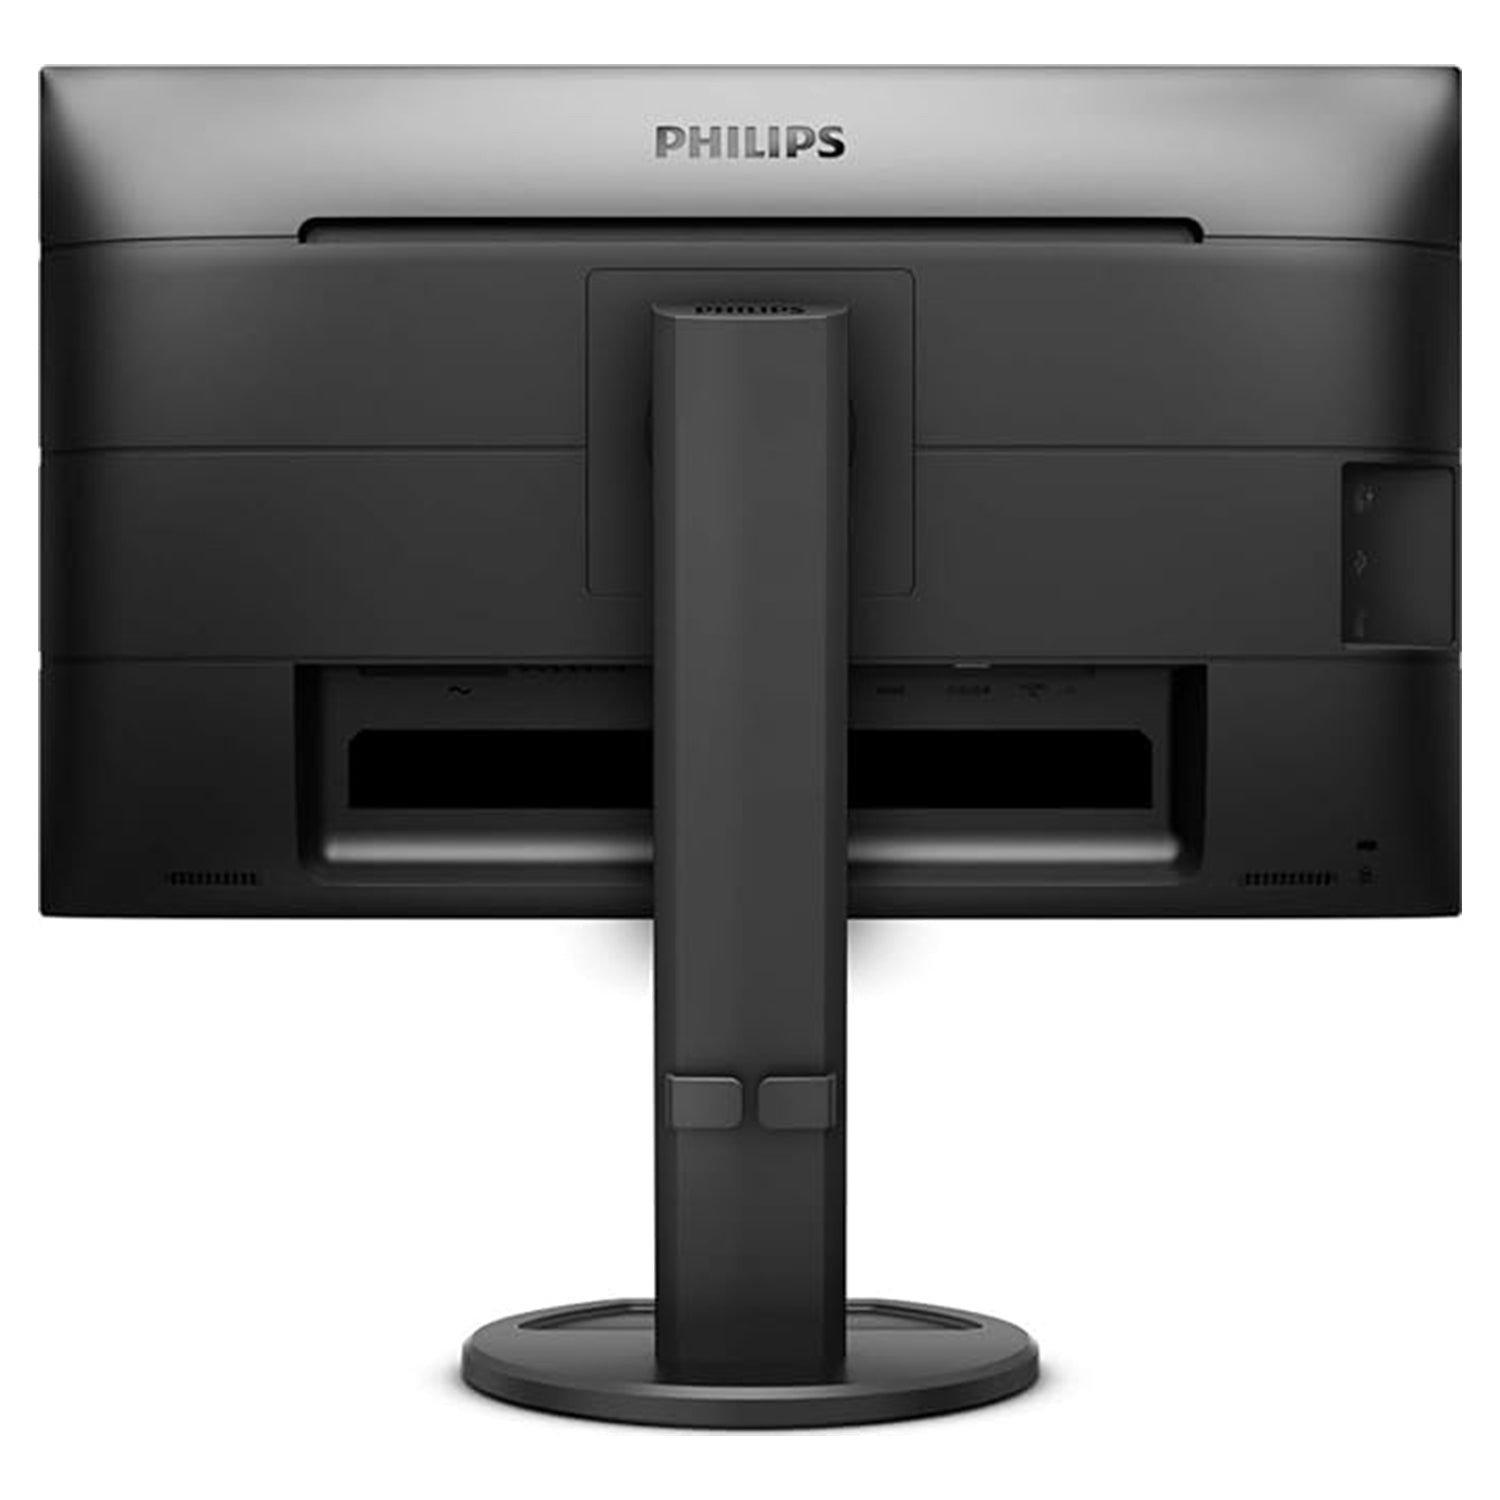 PHILIPS 24" Inch FHD 1920 x 1080 Monitor Adaptive Sync 60Hz Refresh Rate Built-in Speakers Height Adjustable Low Blue Light Flicker Free Monitor HDMI, DisplayPort, VGA, DVI-D(241B8QJEB)